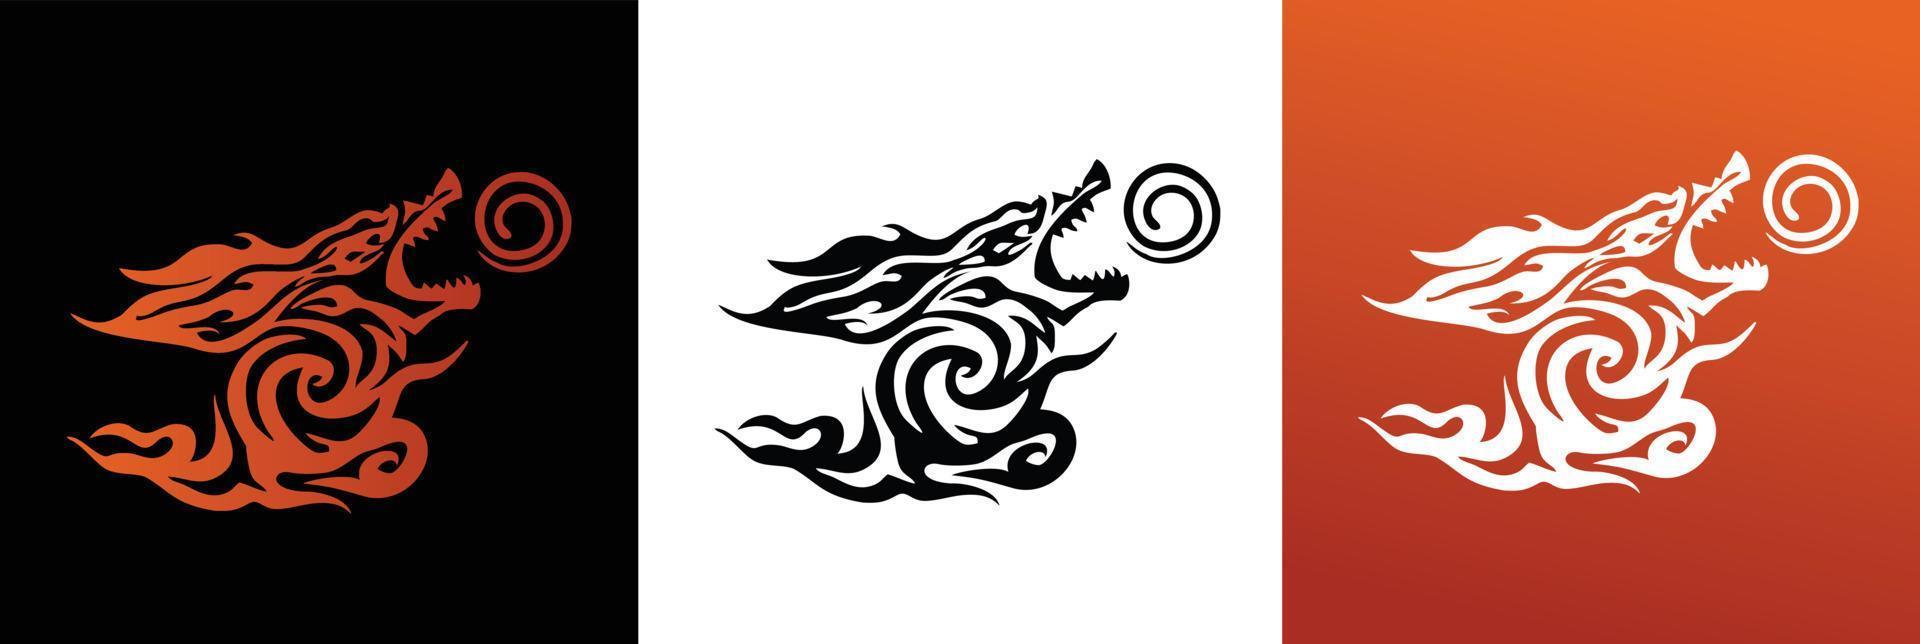 Tribal style dragon silhouette spitting balls in three frames vector